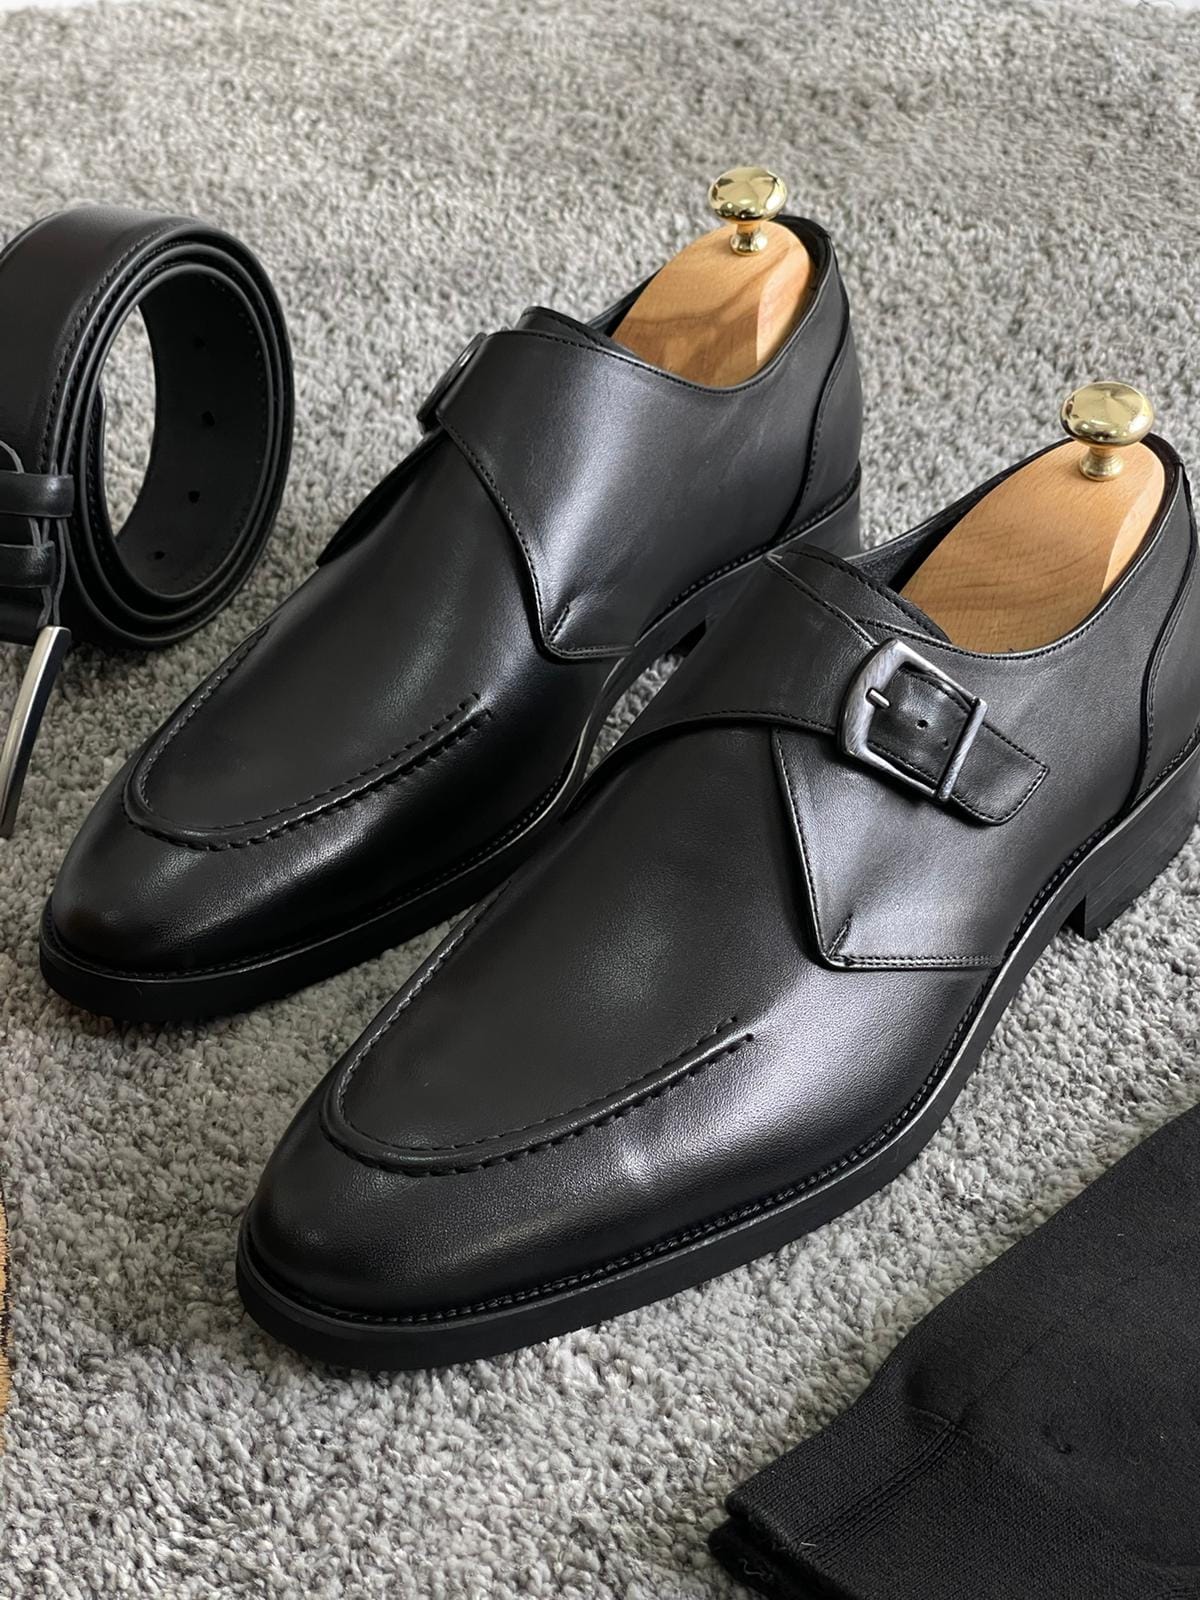 Leather Shoes Black